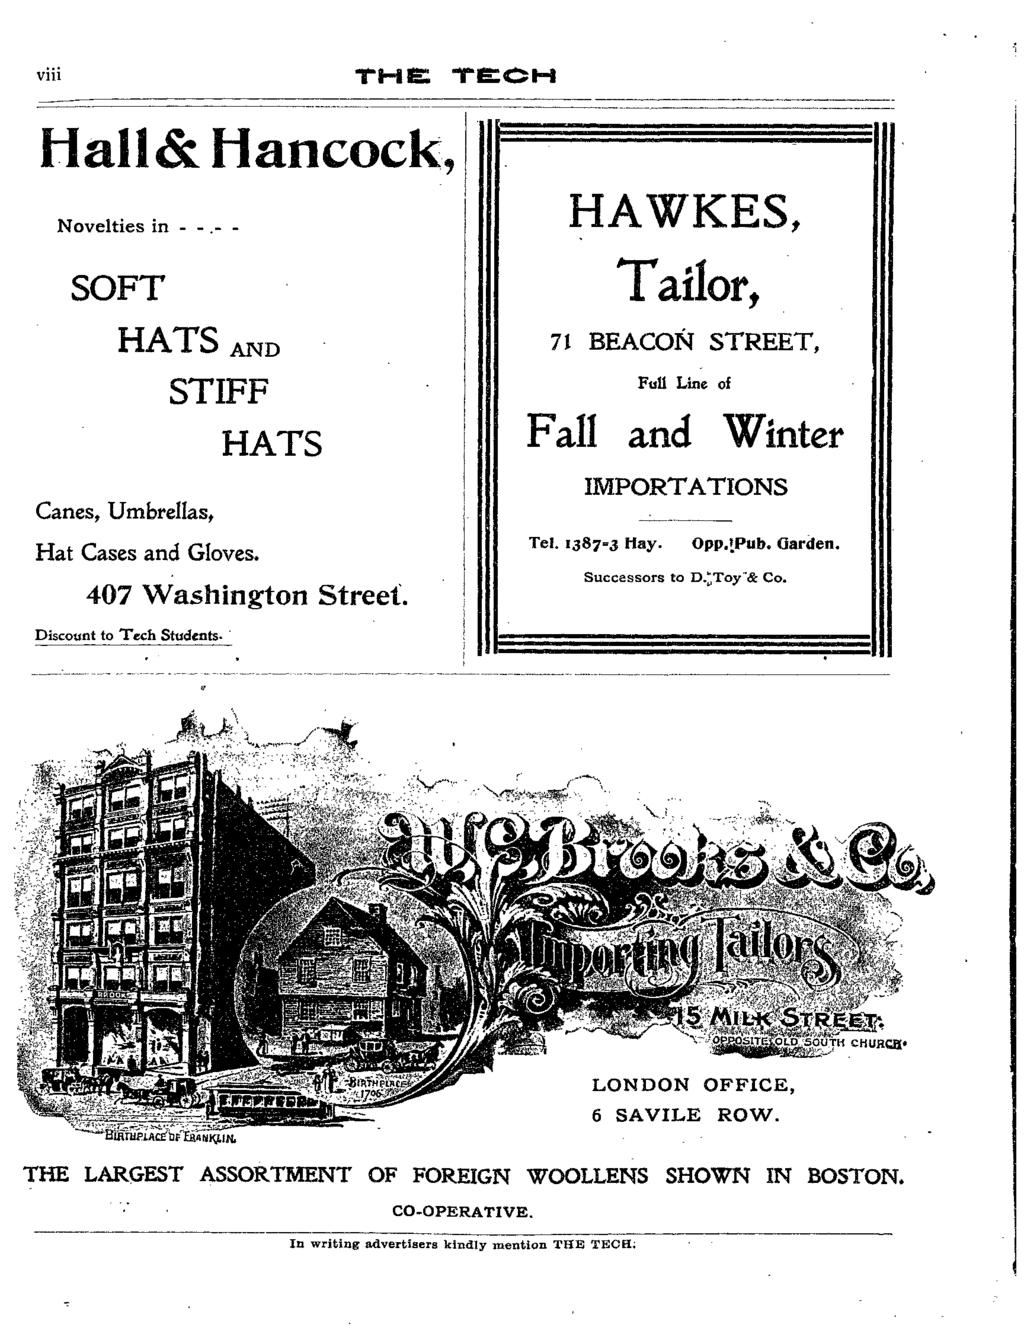 m THE TE: O -M-H Hall& Hancock,9 Noveltes n - -.- - SOFT HATS AND STFF HATS Canes, Umbrellas, Hat Cases and Gloves. 407 Washngton Street. Dscount to Tech Students. - s.-.- _-L _- k- -s -- L d _L--- s 0 HAWKES Talor, 71 BEACON STREET, Full Lne of Fall and Wnter MPORTATONS Tel.